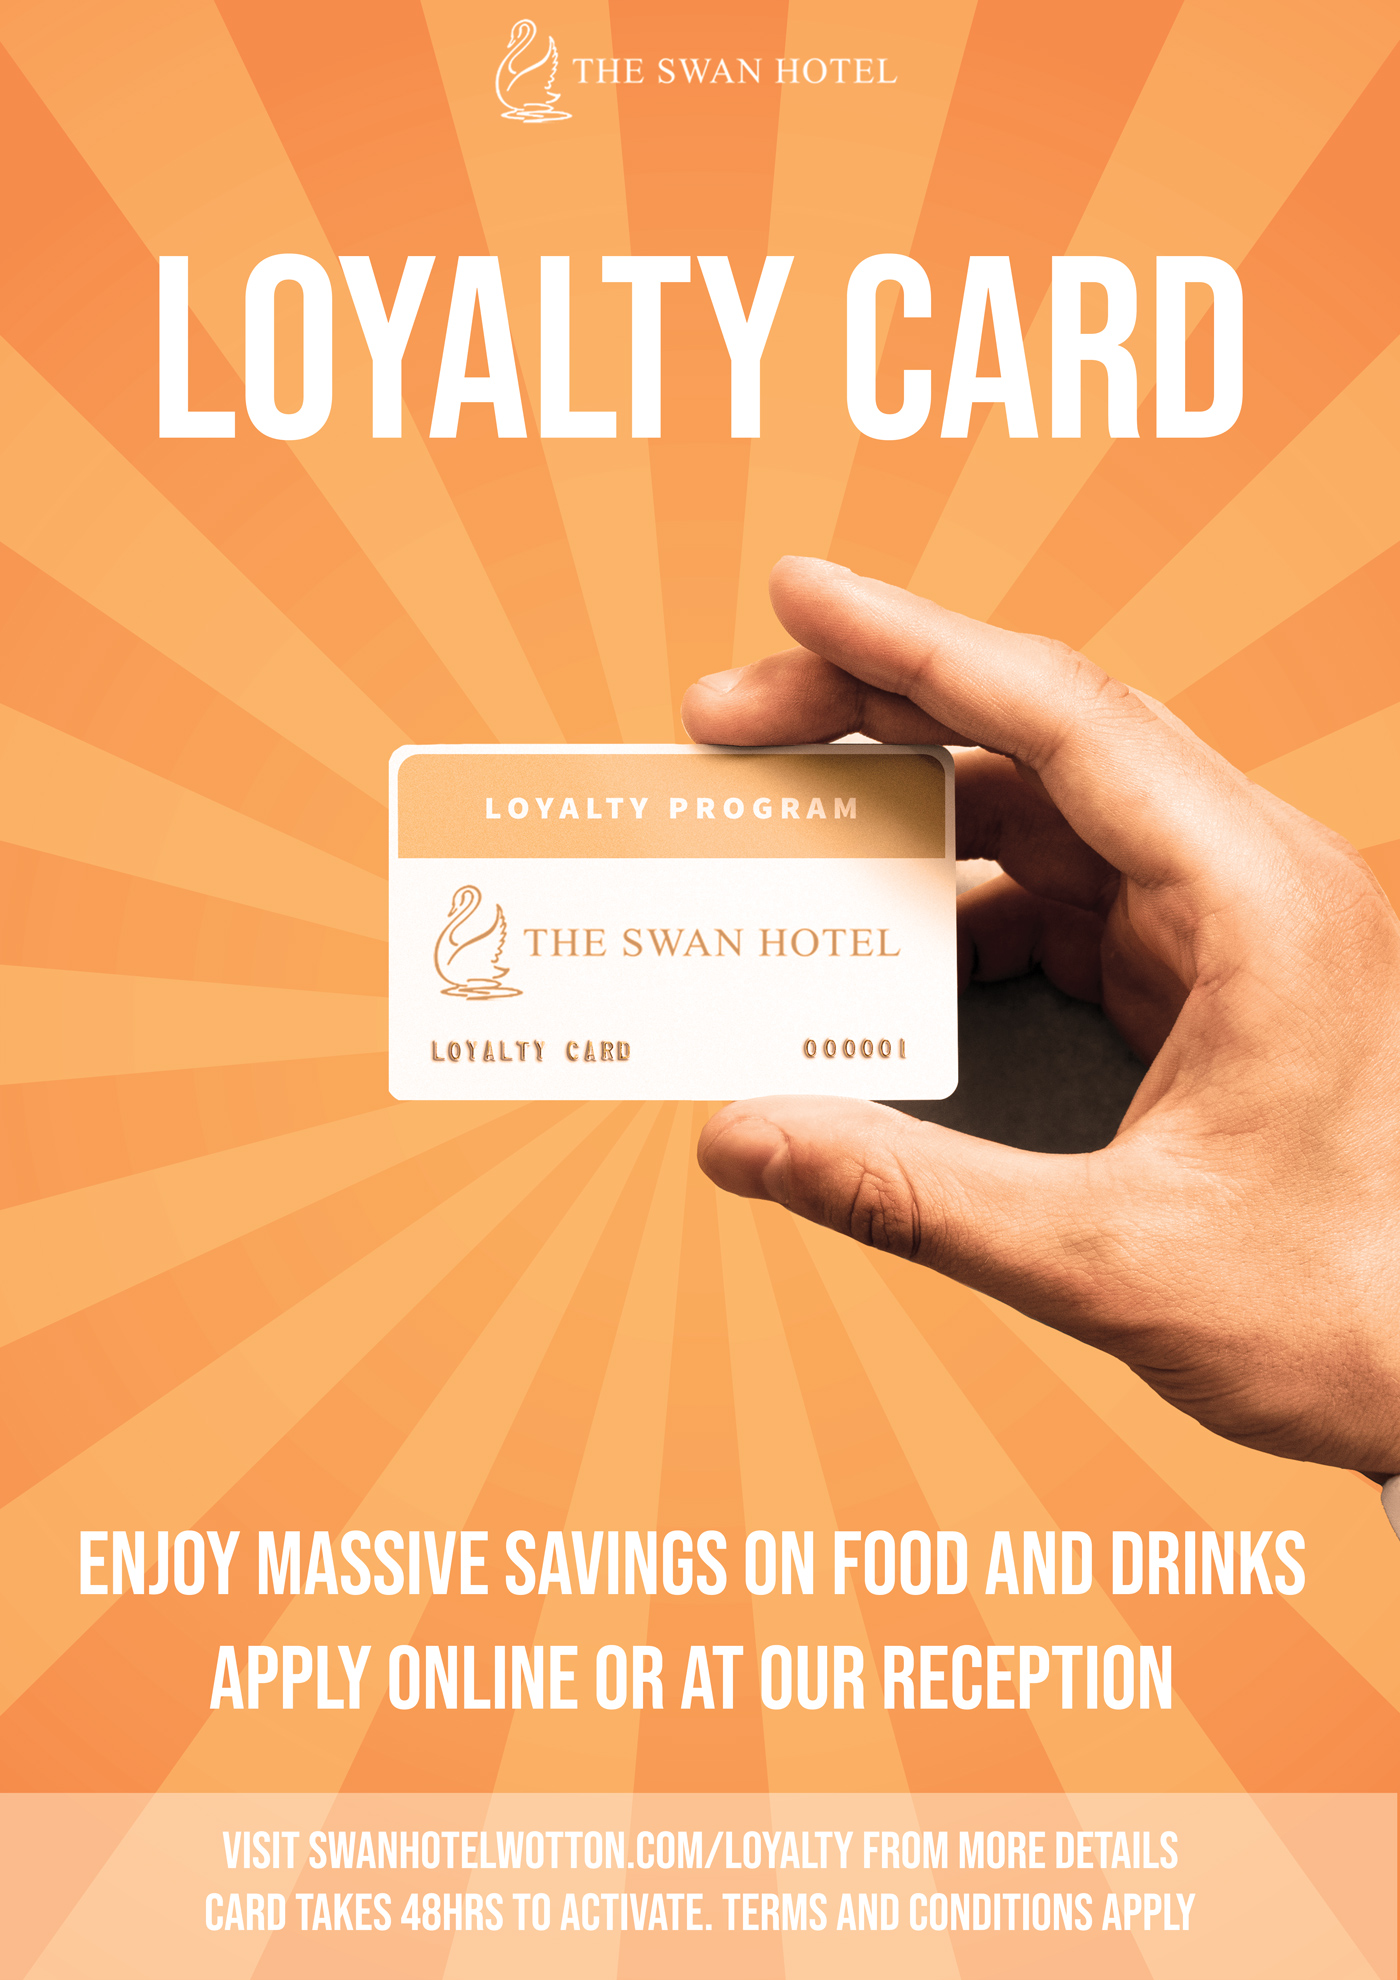 How Much Do Loyalty Cards Cost